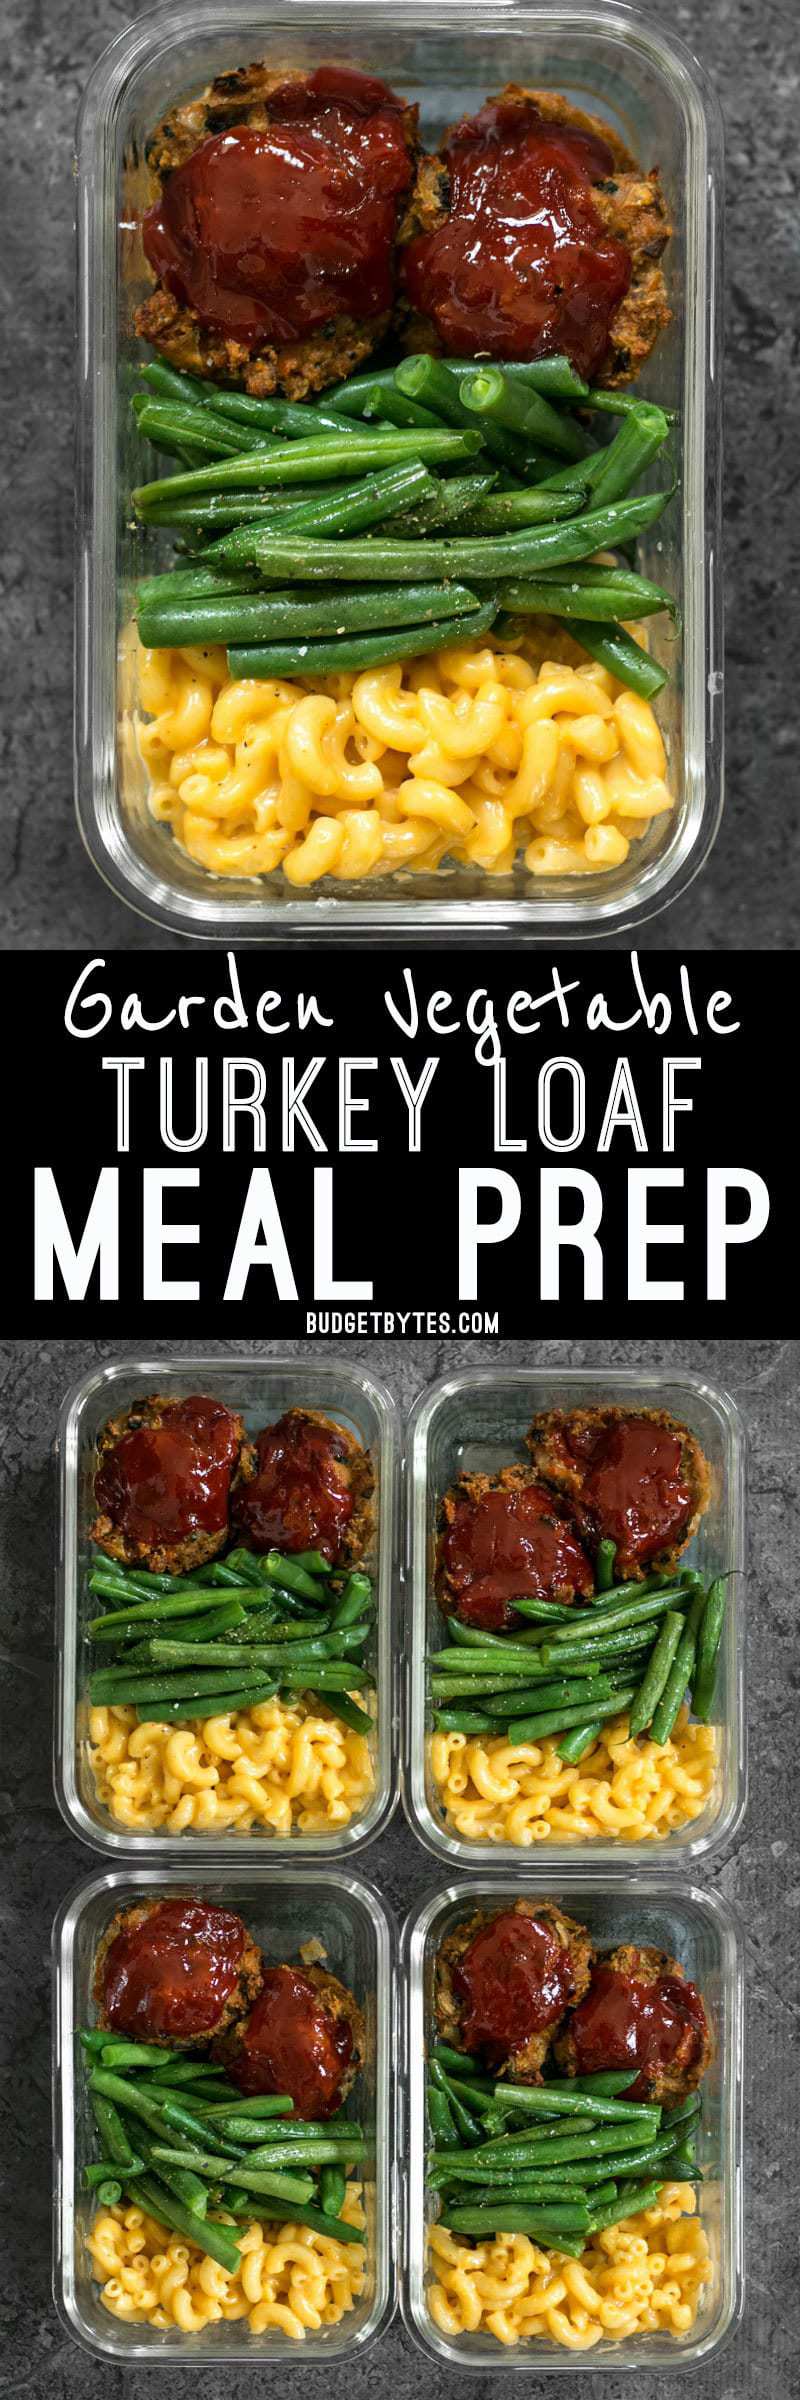 It's comfort food in a box! You'll look forward to eating this veggie-packed Garden Vegetable Turkey Loaf Meal Prep for lunch every day. BudgetBytes.com